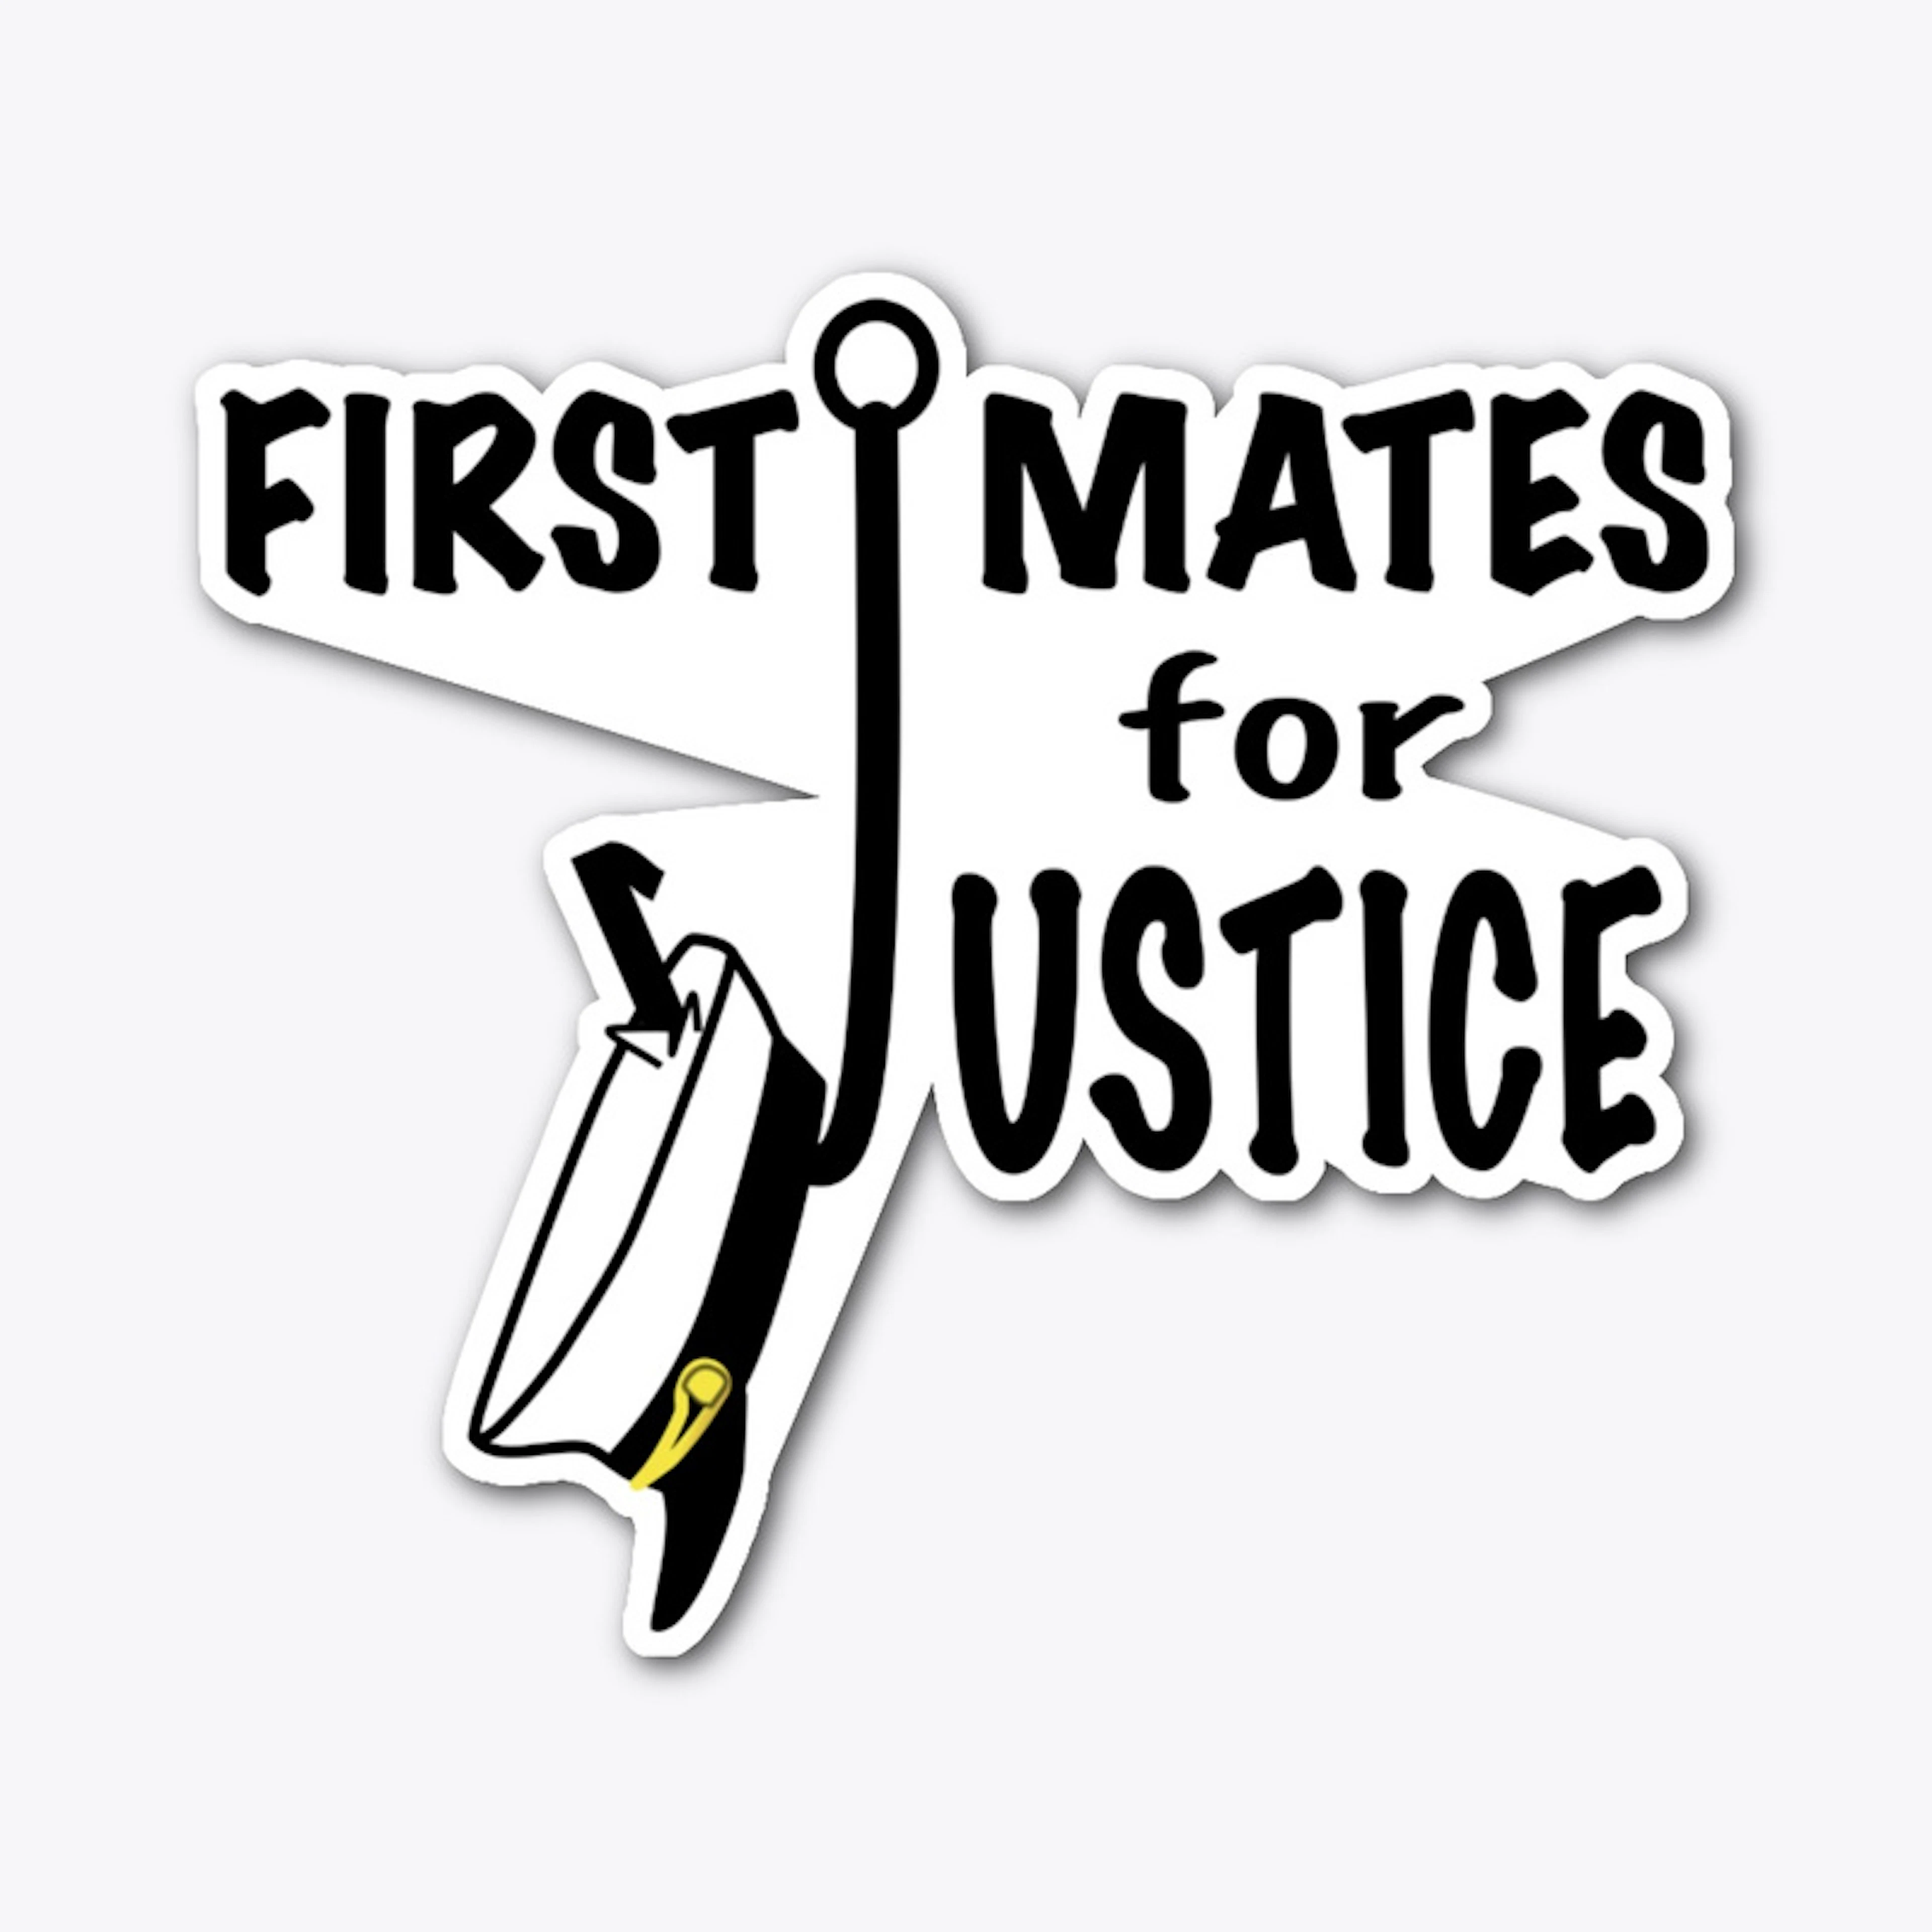 First Mates for Justice!